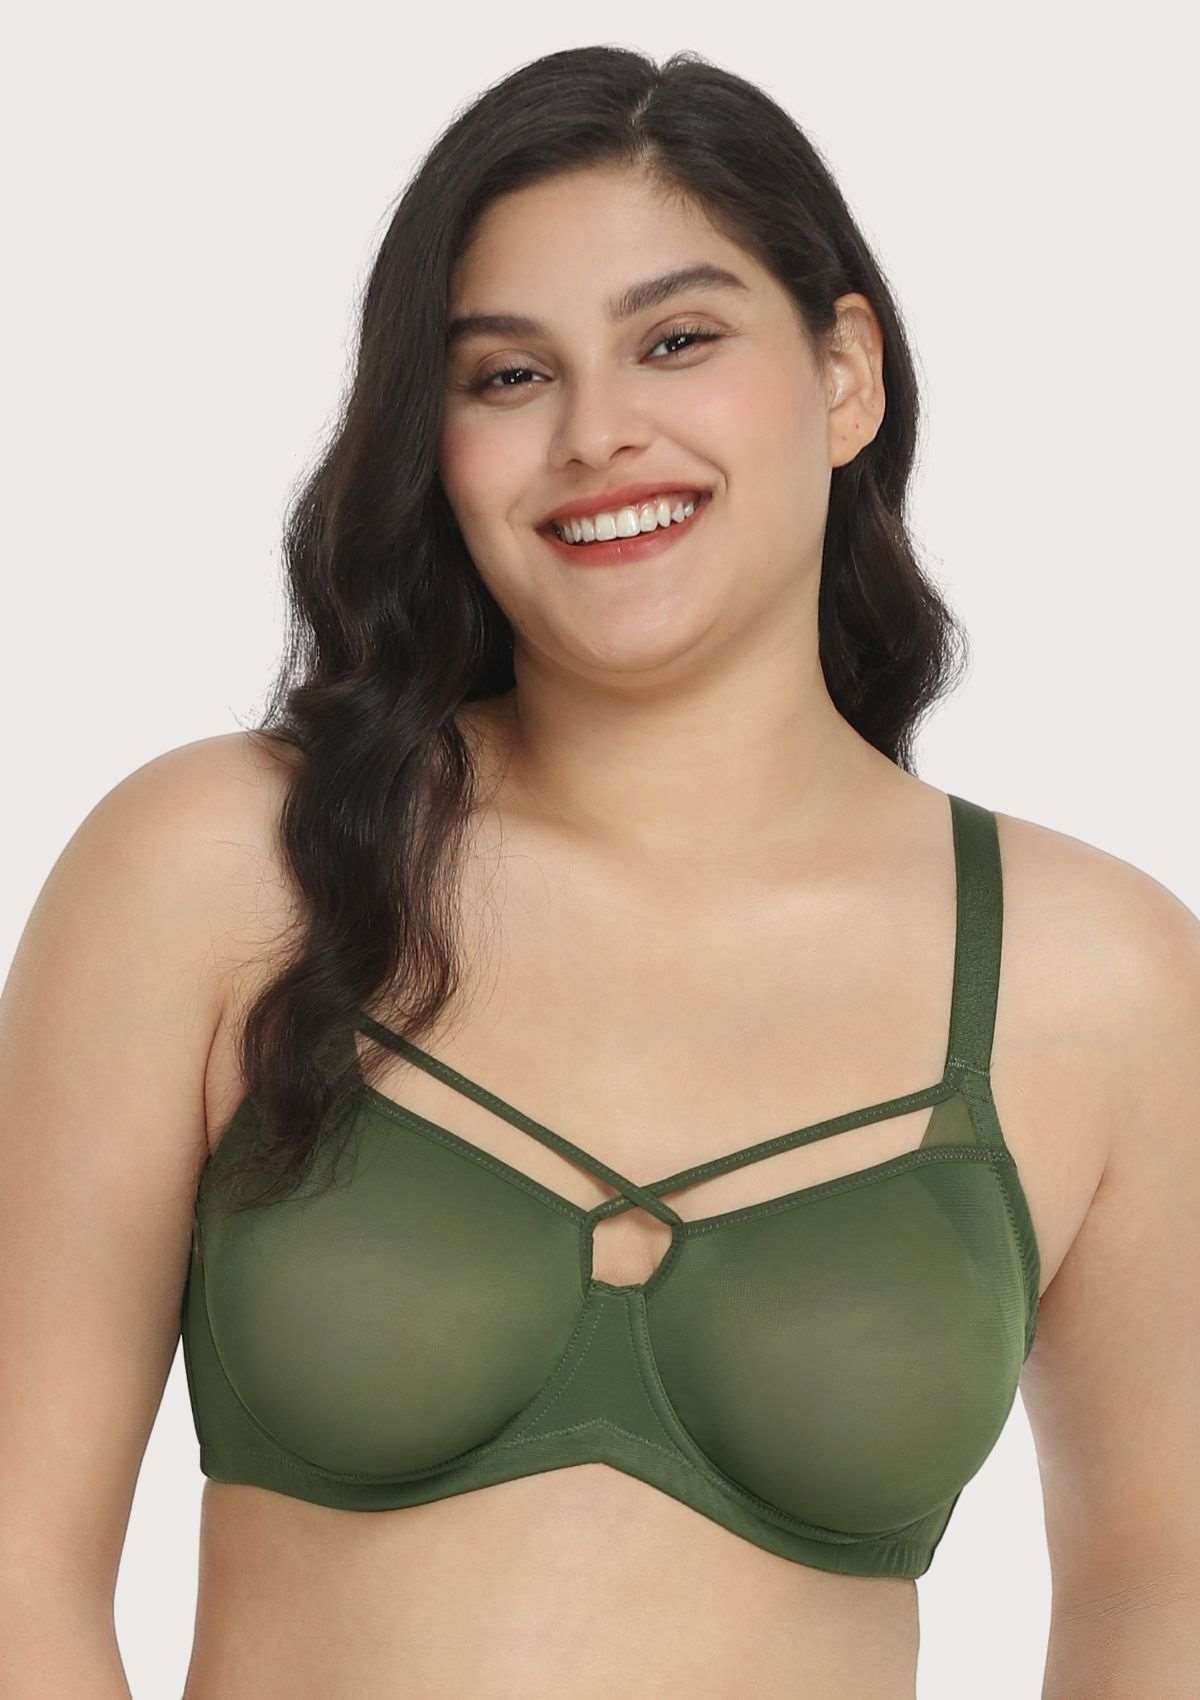 Cacique Strappy Print Boost Plunge Bra Womens 42DDD Green Underwire Padded  Size undefined - $25 - From Jaime